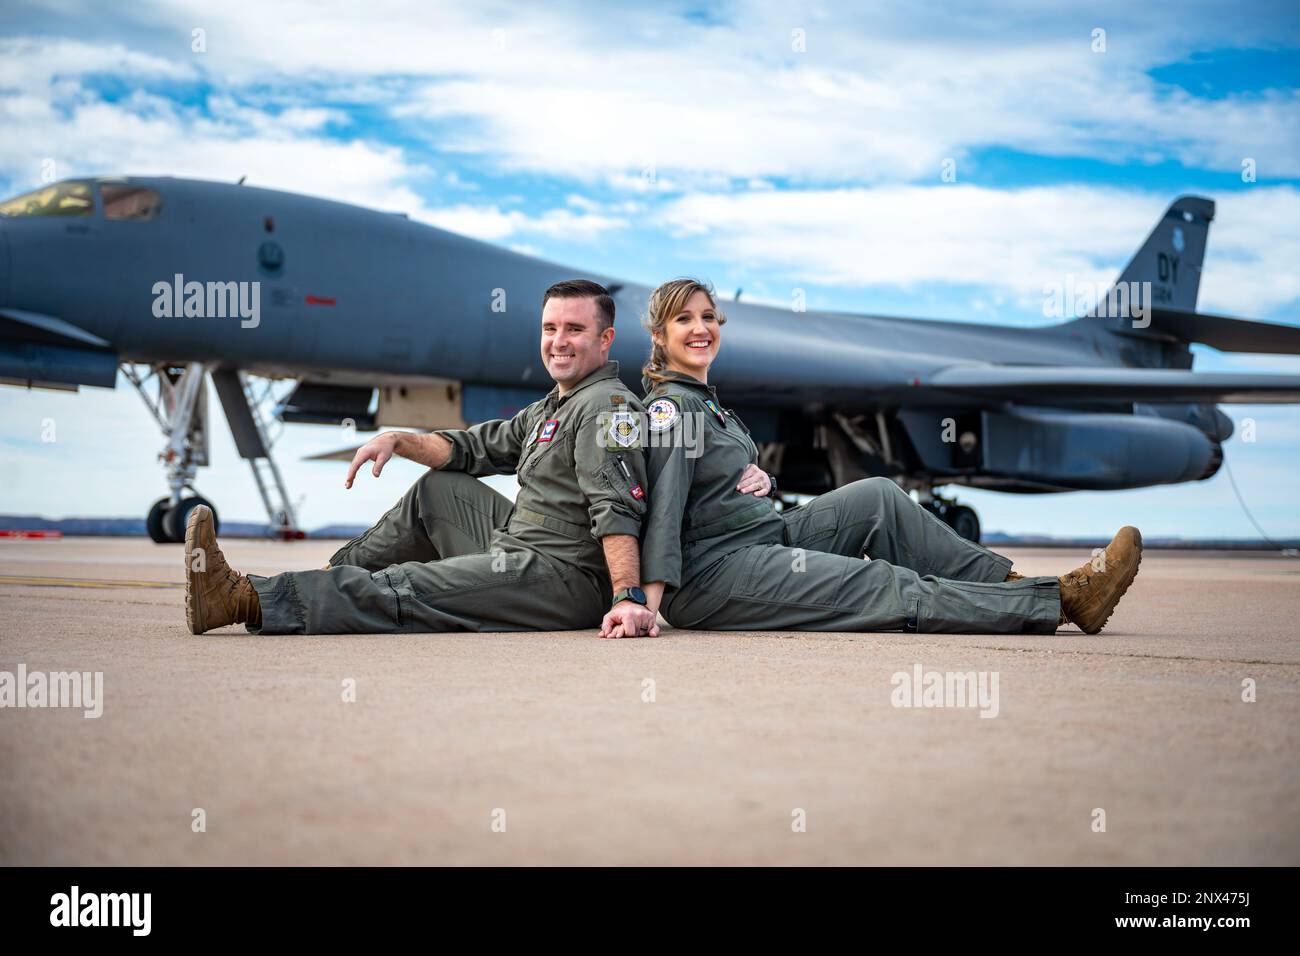 U.S. Air Force Maj. Lauren Olme, 77th Weapons Squadron assistant director of operations, and her husband, Maj. Mark Olme, 7th Operations Support Squadron bomb wing weapons officer, pose for a photo next to a B-1B Lancer at Dyess Air Force Base, Texas, Feb. 20, 2023. Lauren, who is currently pregnant, can continue flying after recently getting approved under the Air Force’s new guidance which allows female aircrew members to voluntarily request to fly during pregnancy. No waiver is required to fly in the second trimester with an uncomplicated pregnancy in a non-ejection seat aircraft if all fli Stock Photo